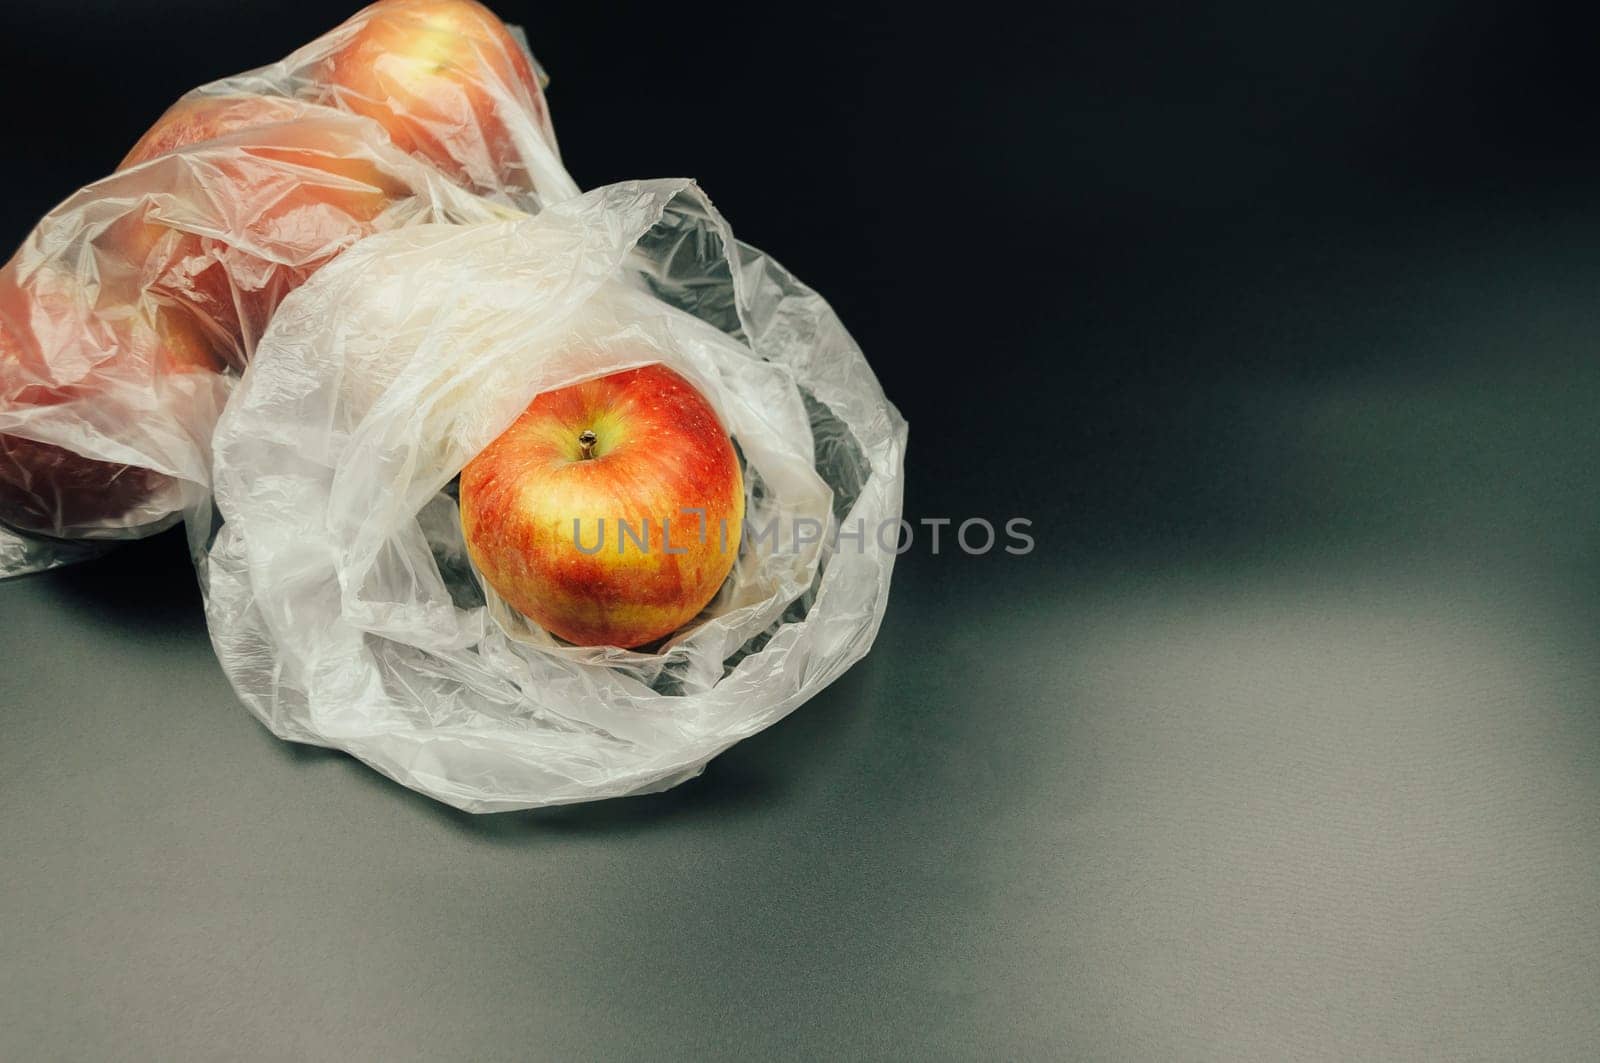 A plastic bag with an apple inside by Alla_Morozova93